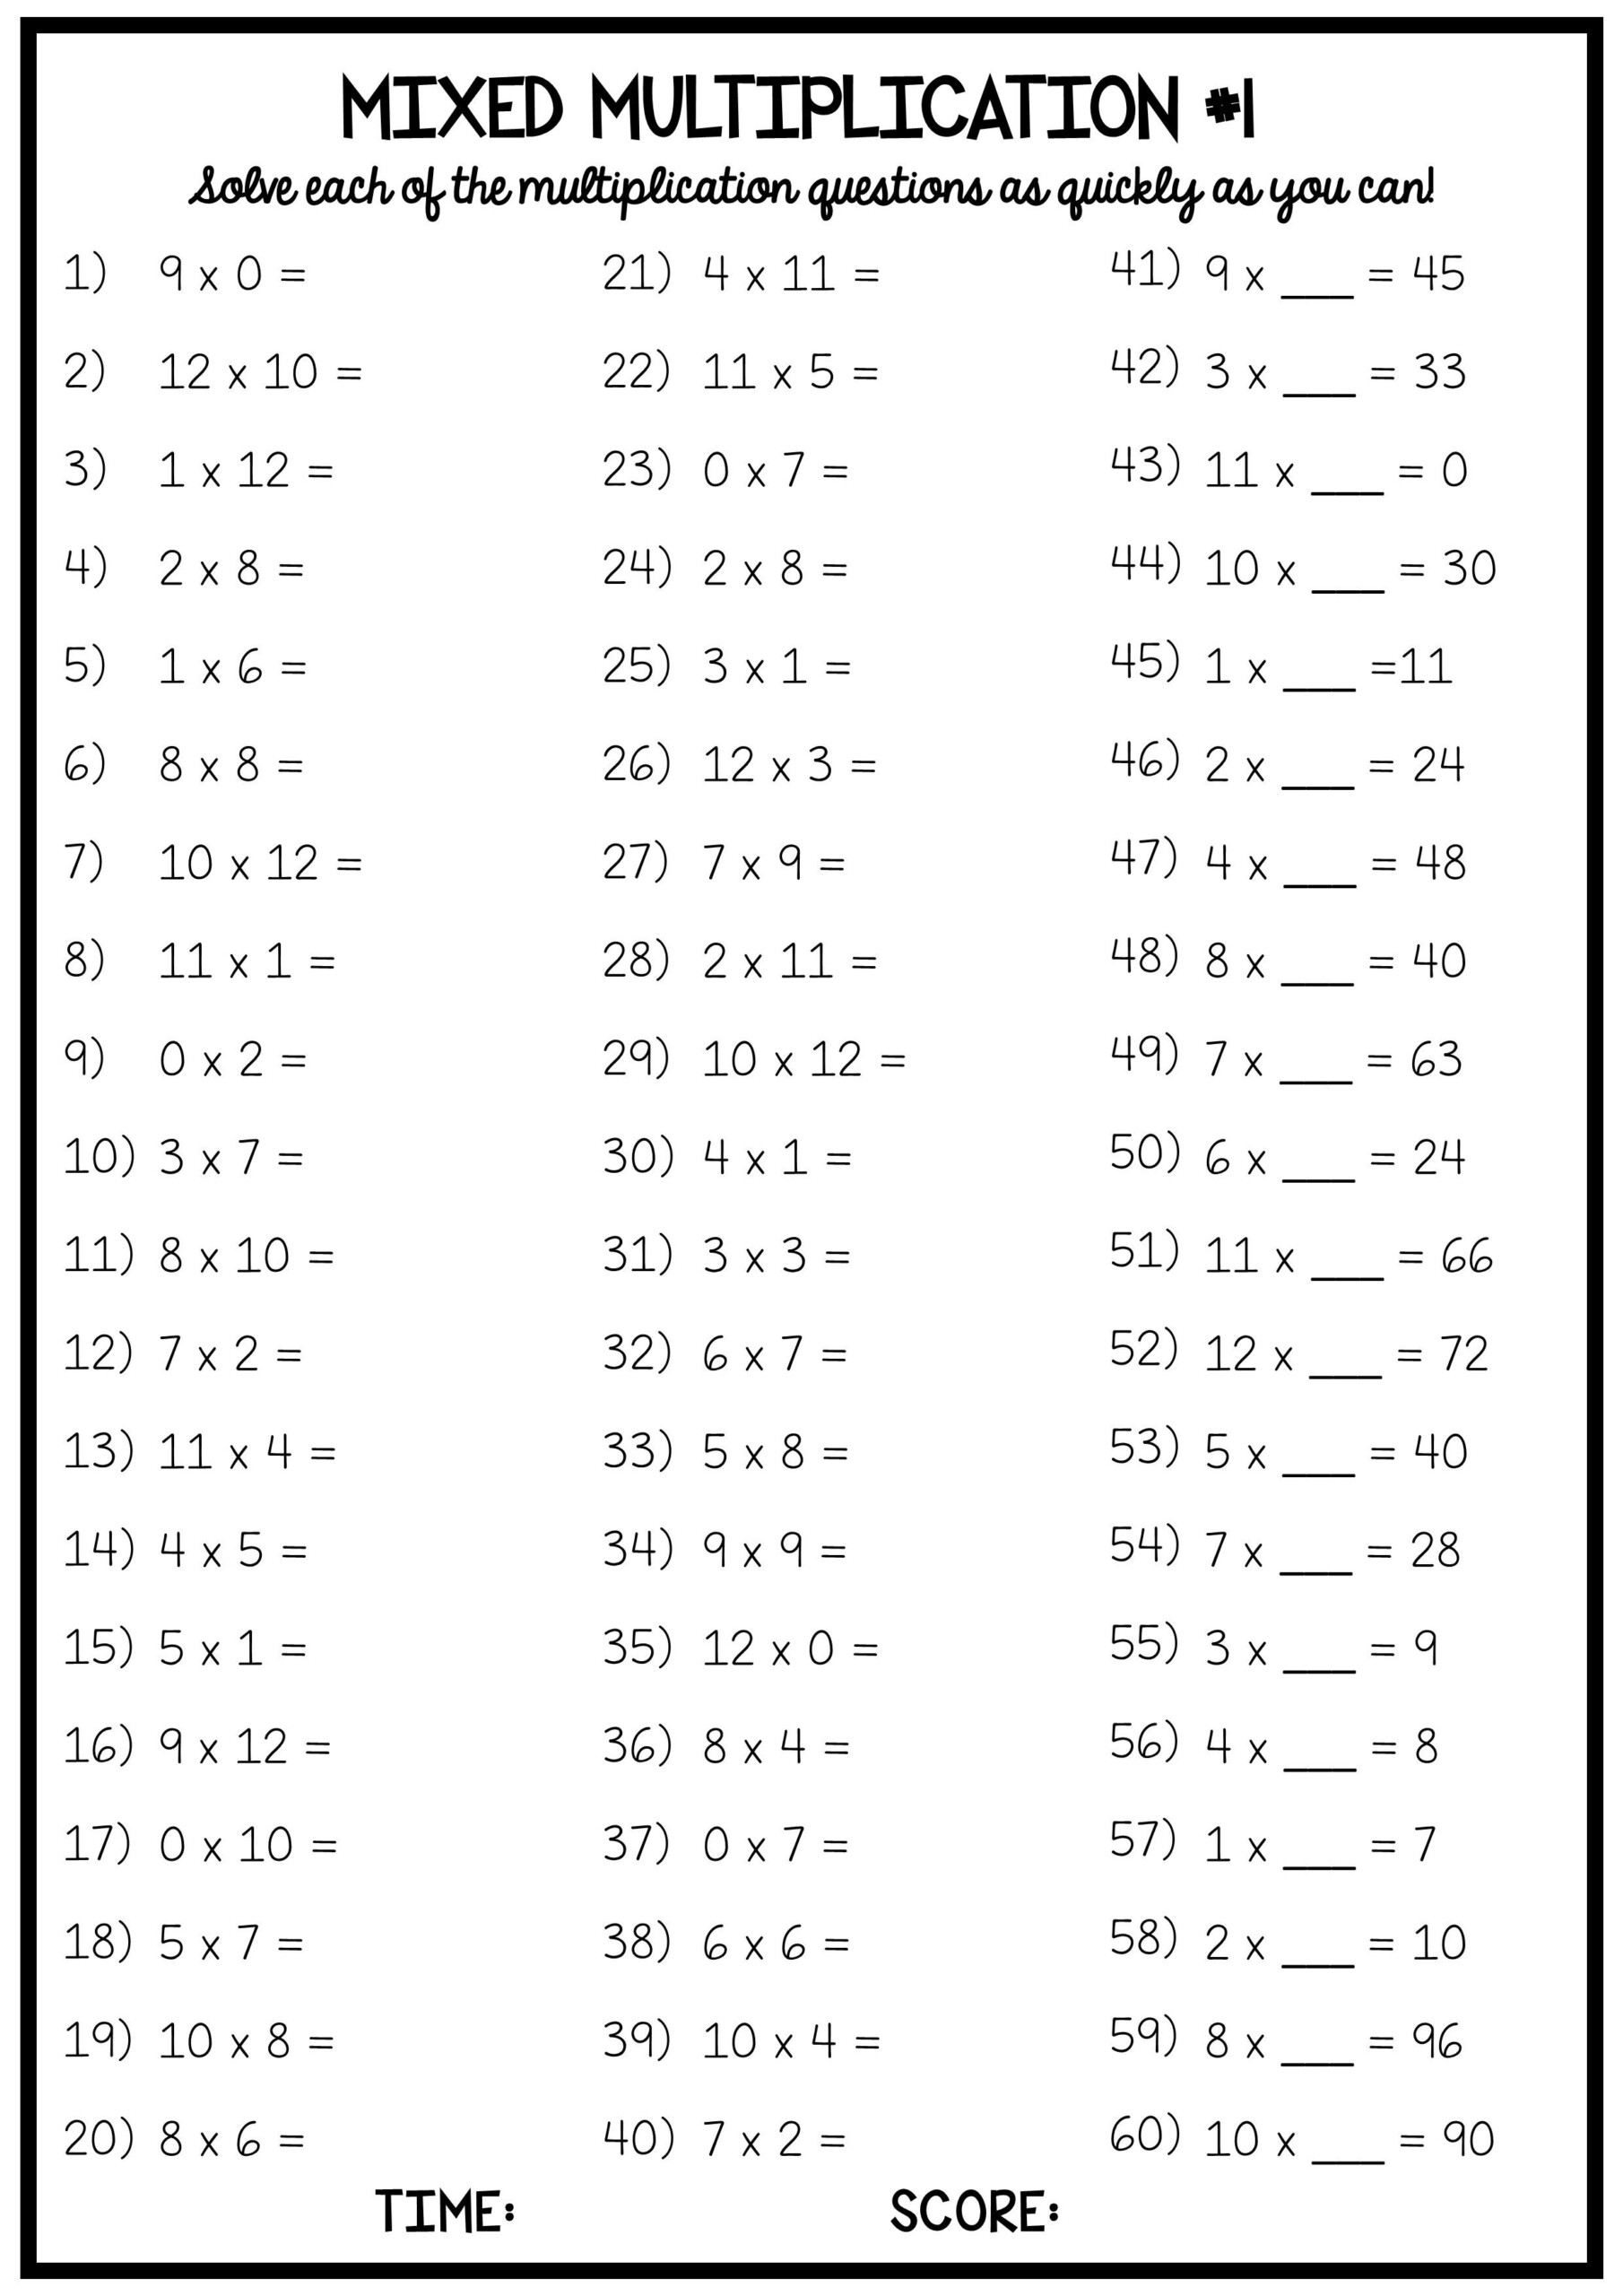 20 Worksheets For Students To Complete The Multiplication intended for Printable Multiplication Tables No Answers